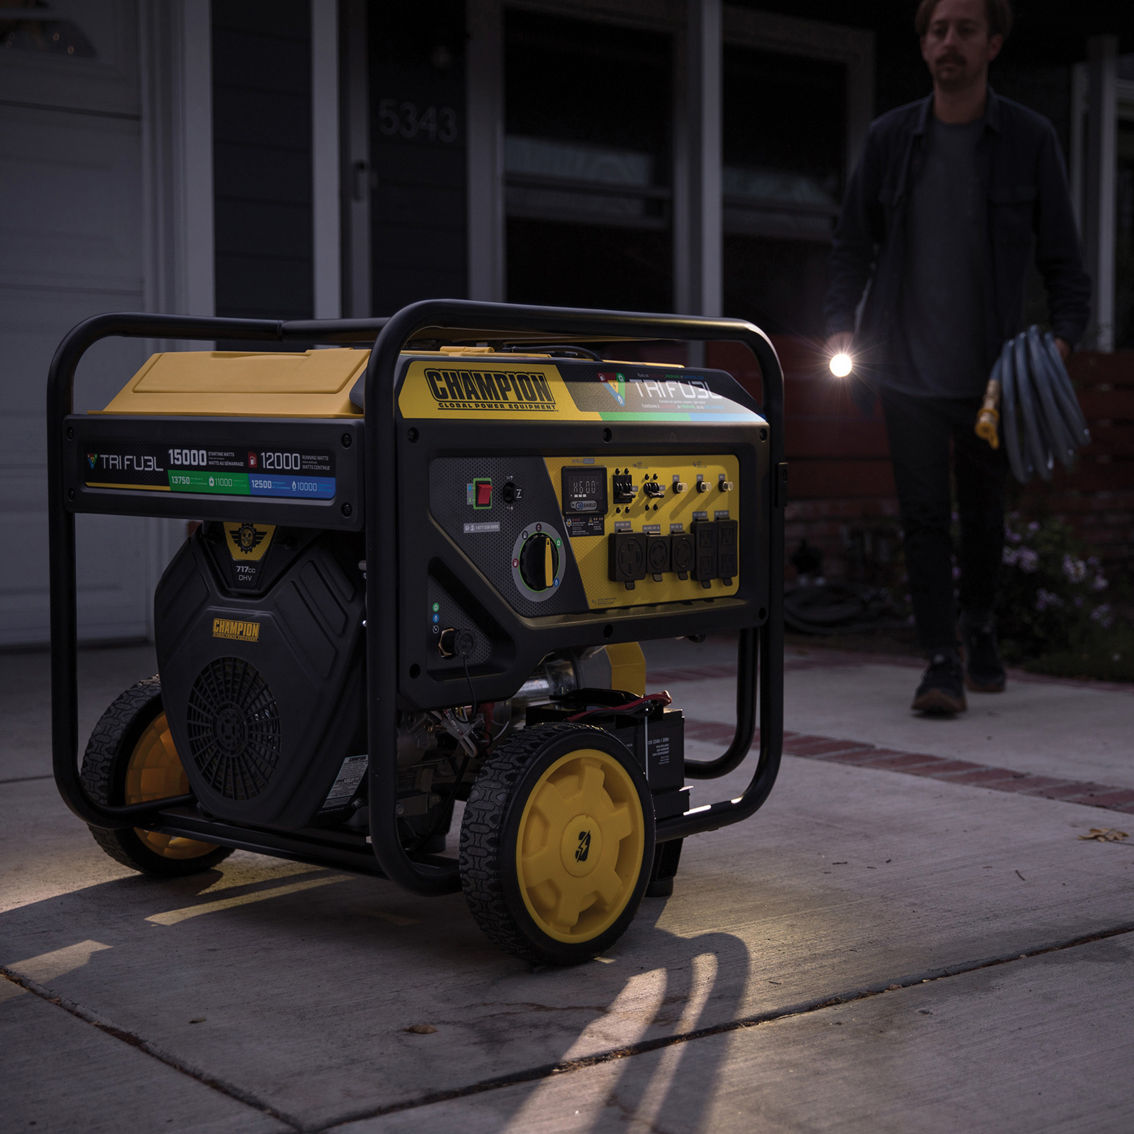 Champion 12,000W Tri Fuel Portable Generator with Electric Start and CO Shield - Image 4 of 10